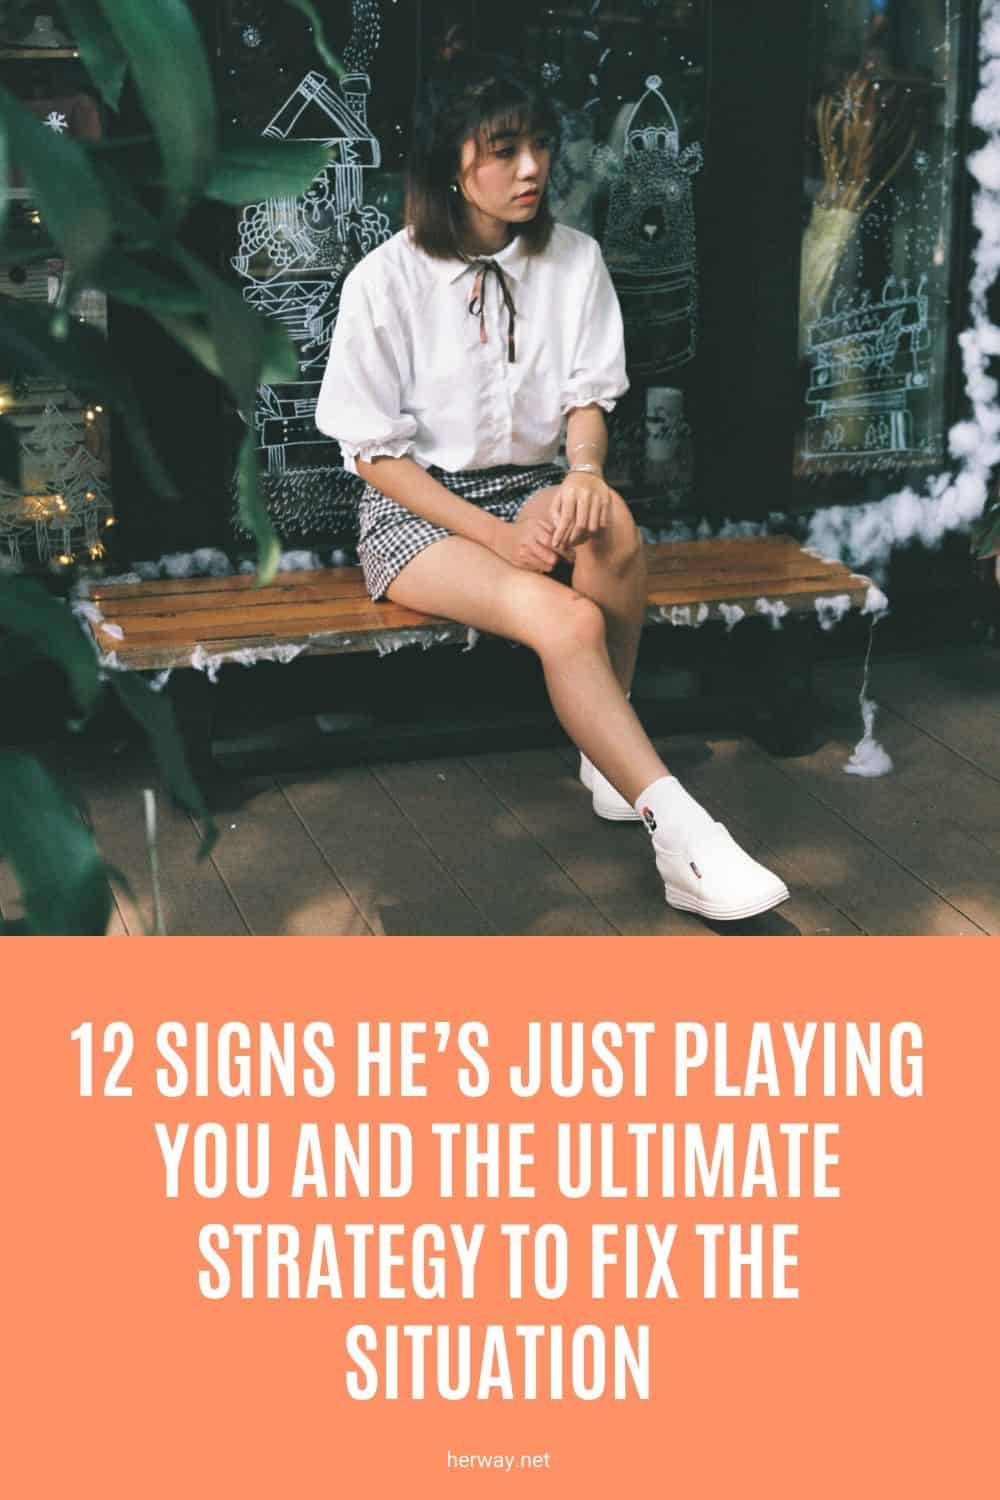 12 Signs He’s Just Playing You And The Ultimate Strategy To Fix The Situation